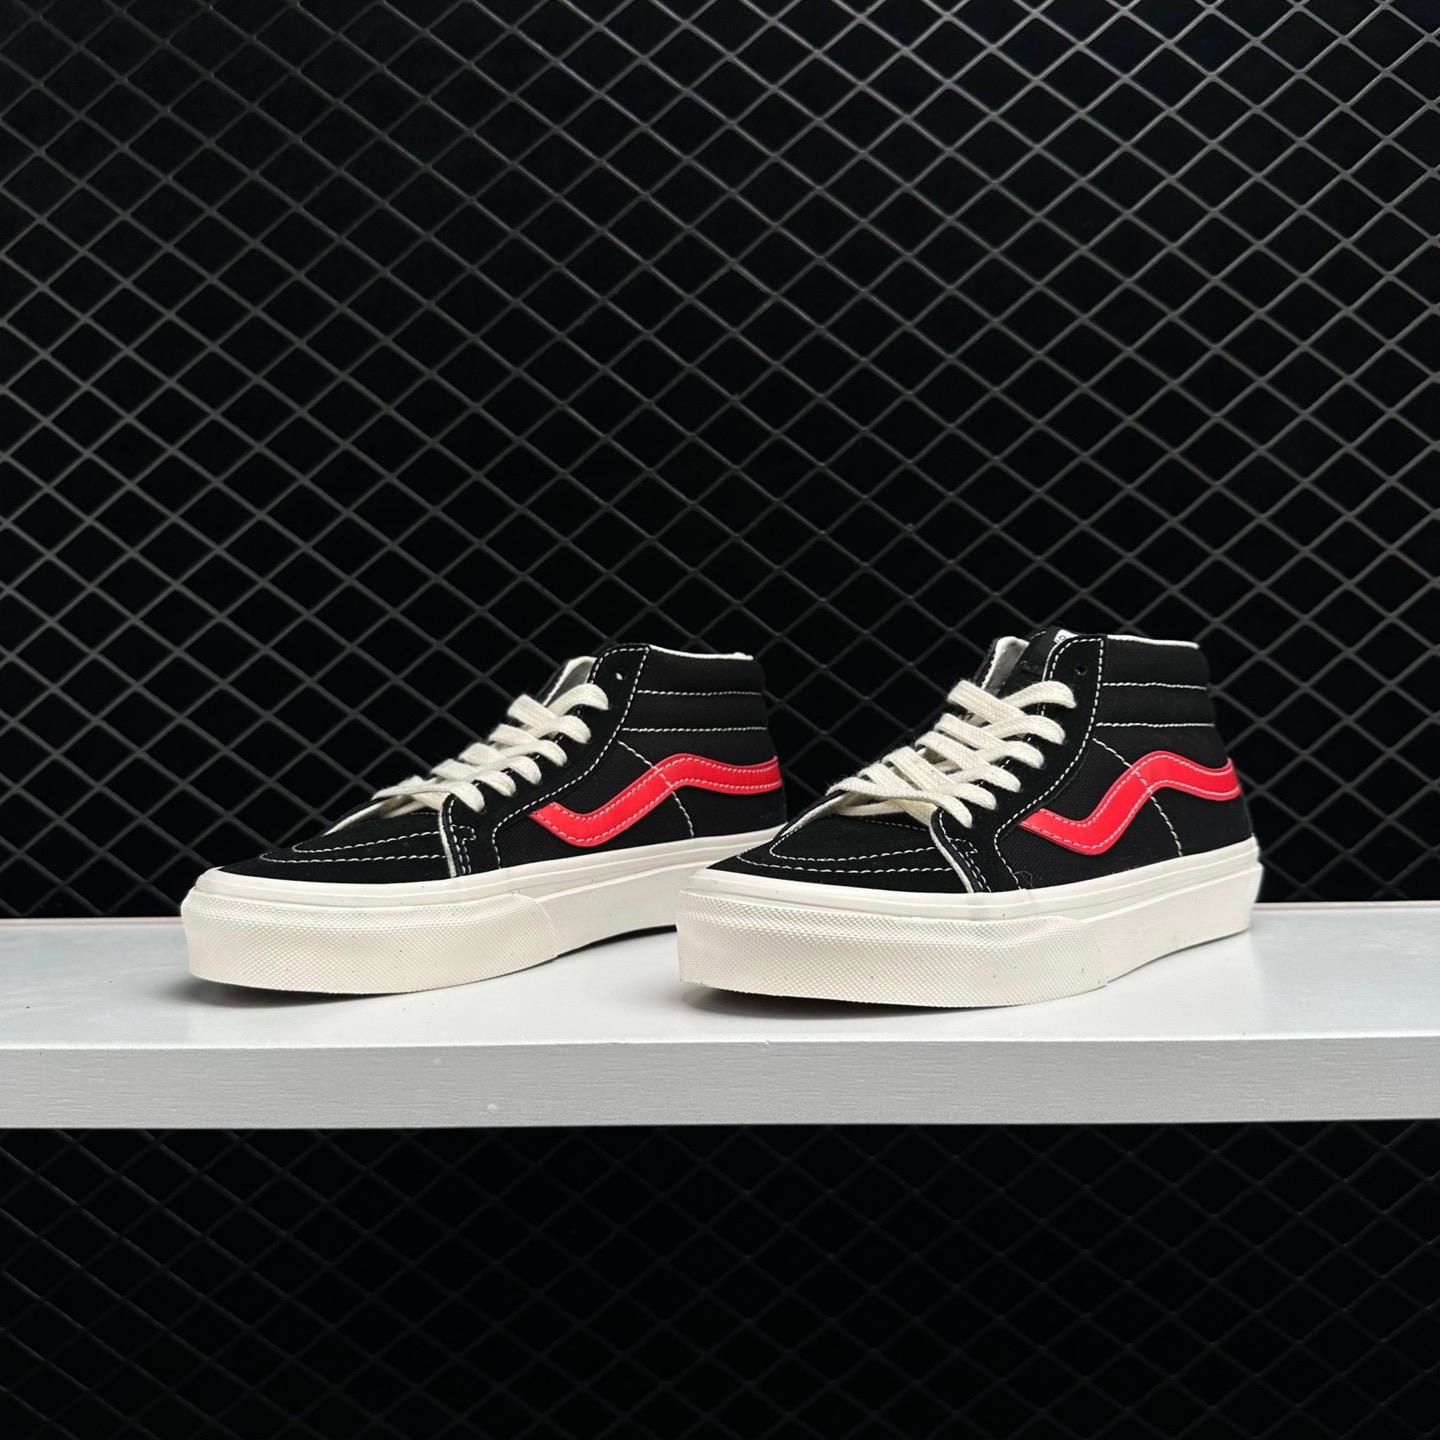 Vans SK8-Mid Black-Red 'Black Red' VN0A391FTP2 - Trendy Black and Red Mid-Top Sneakers